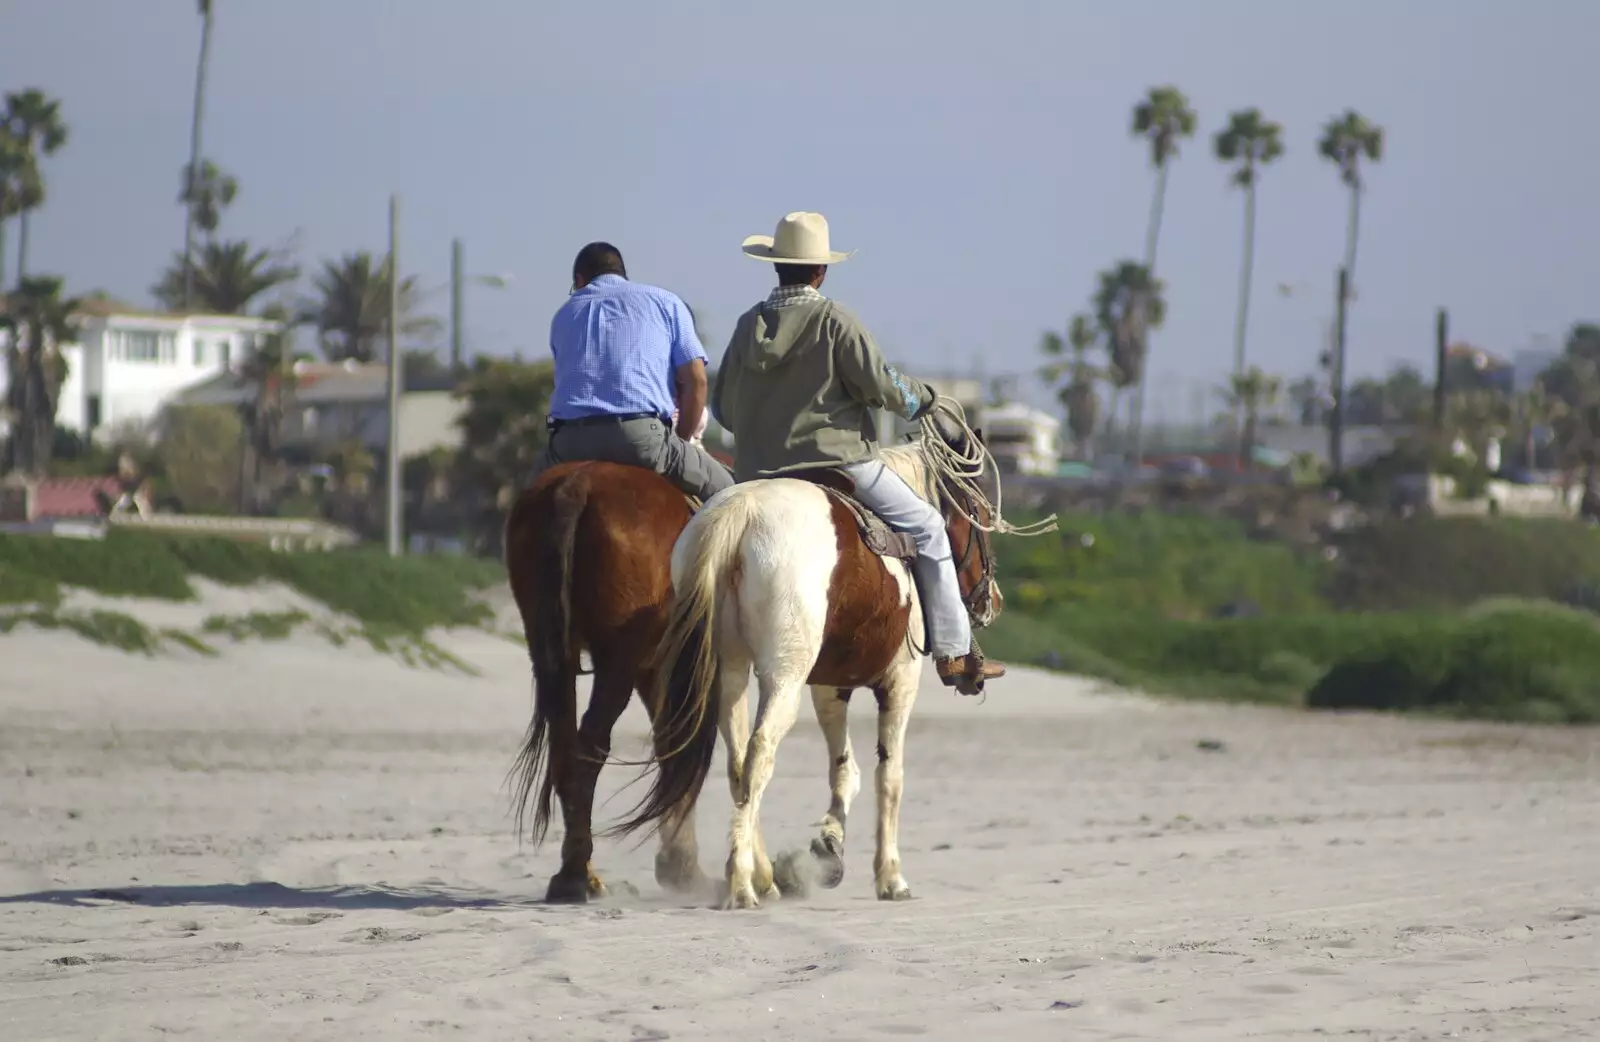 A couple of ponies trot along the beach, from Rosarito and Tijuana, Baja California, Mexico - 2nd March 2008